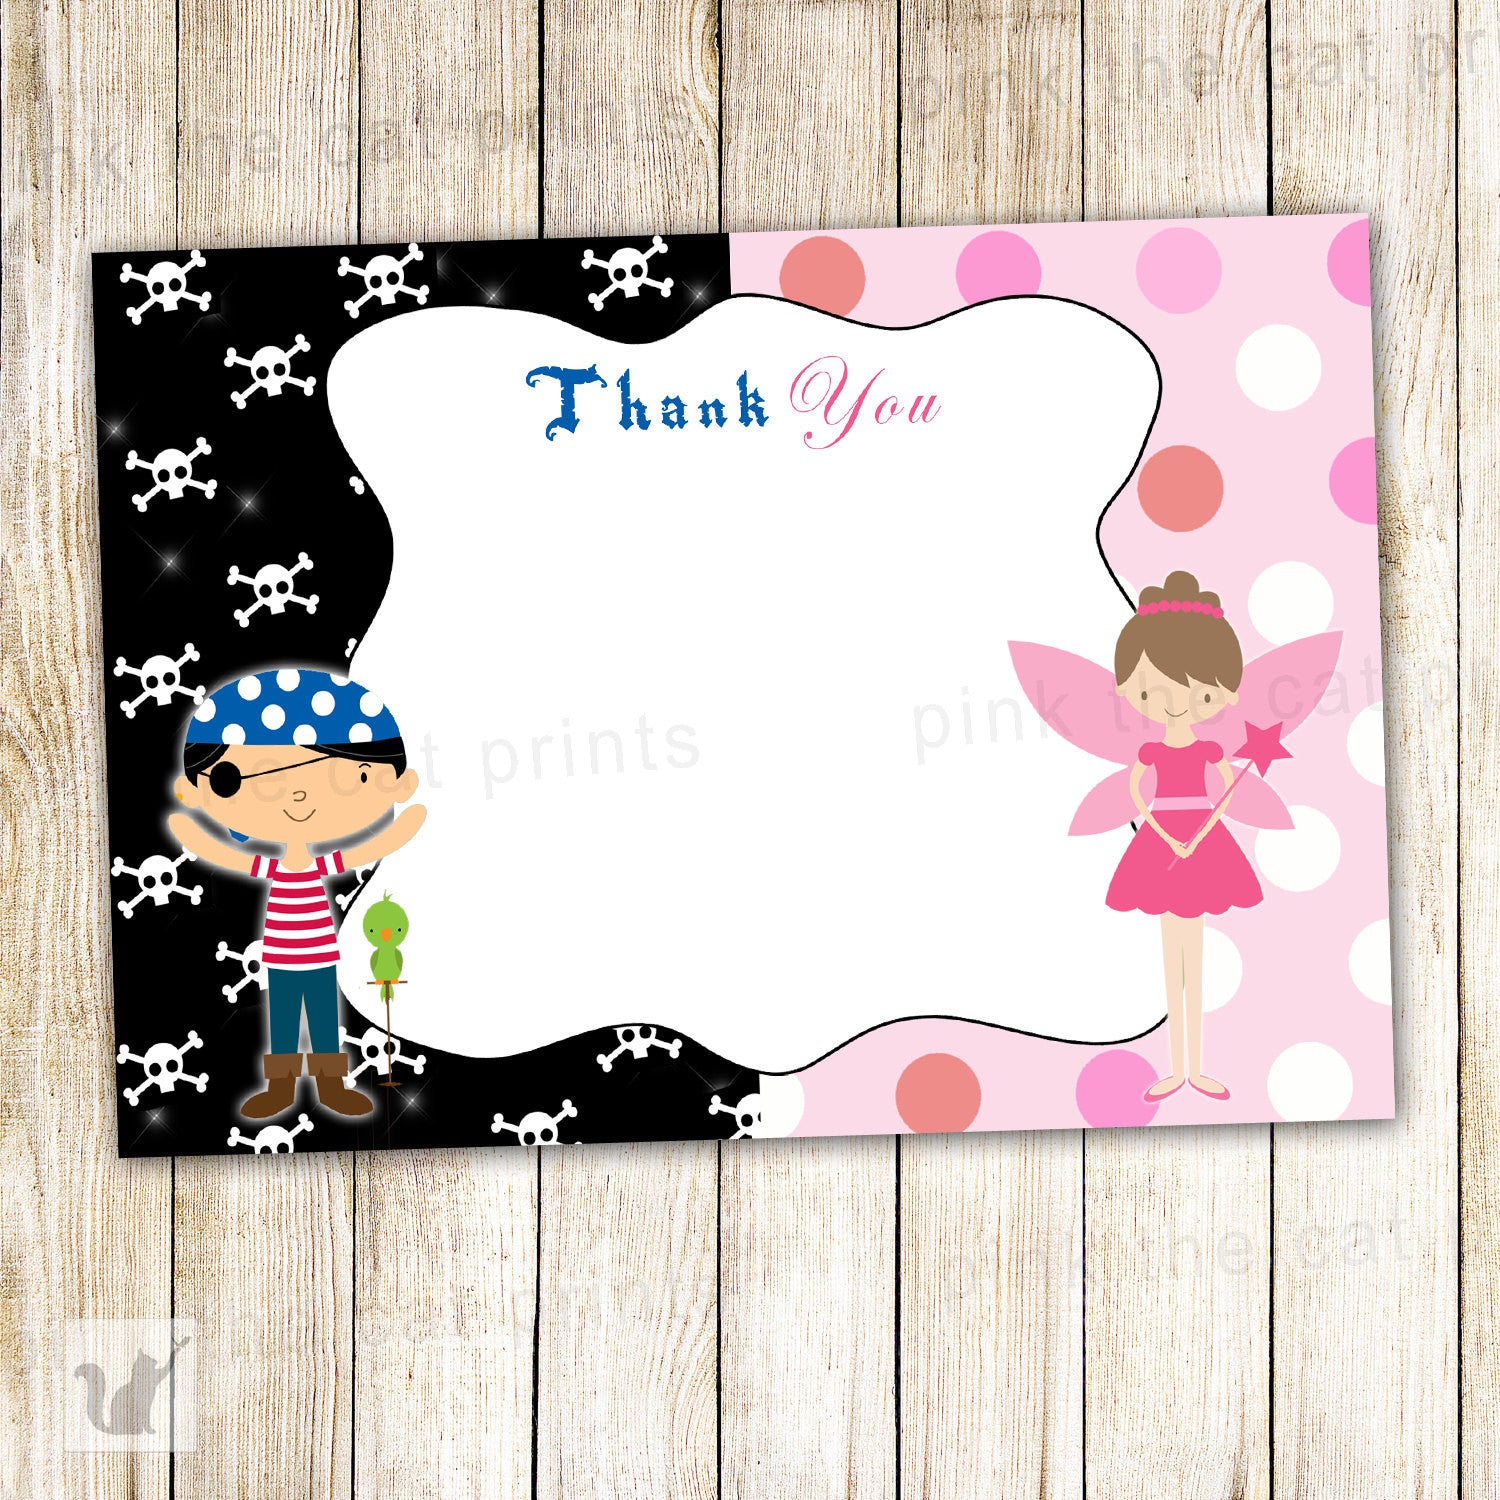 Pirate Fairy Thank You Card - Pixie Kids Birthday Party Notes Printable INSTANT DOWNLOAD